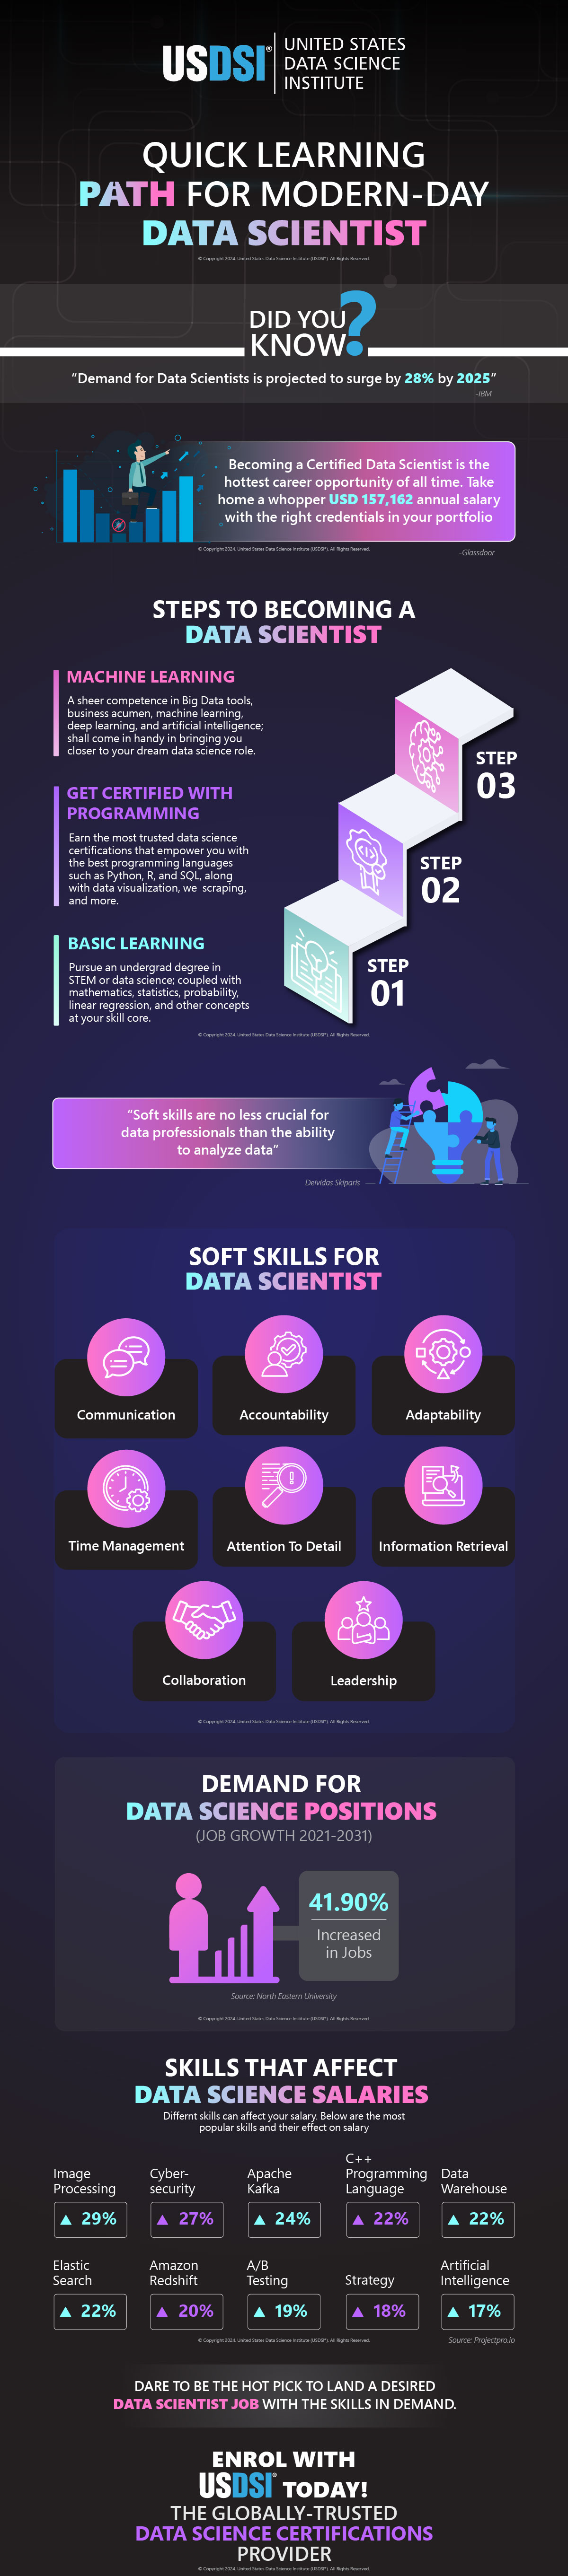 Quick Learning Path for Modern-Day Data Scientists